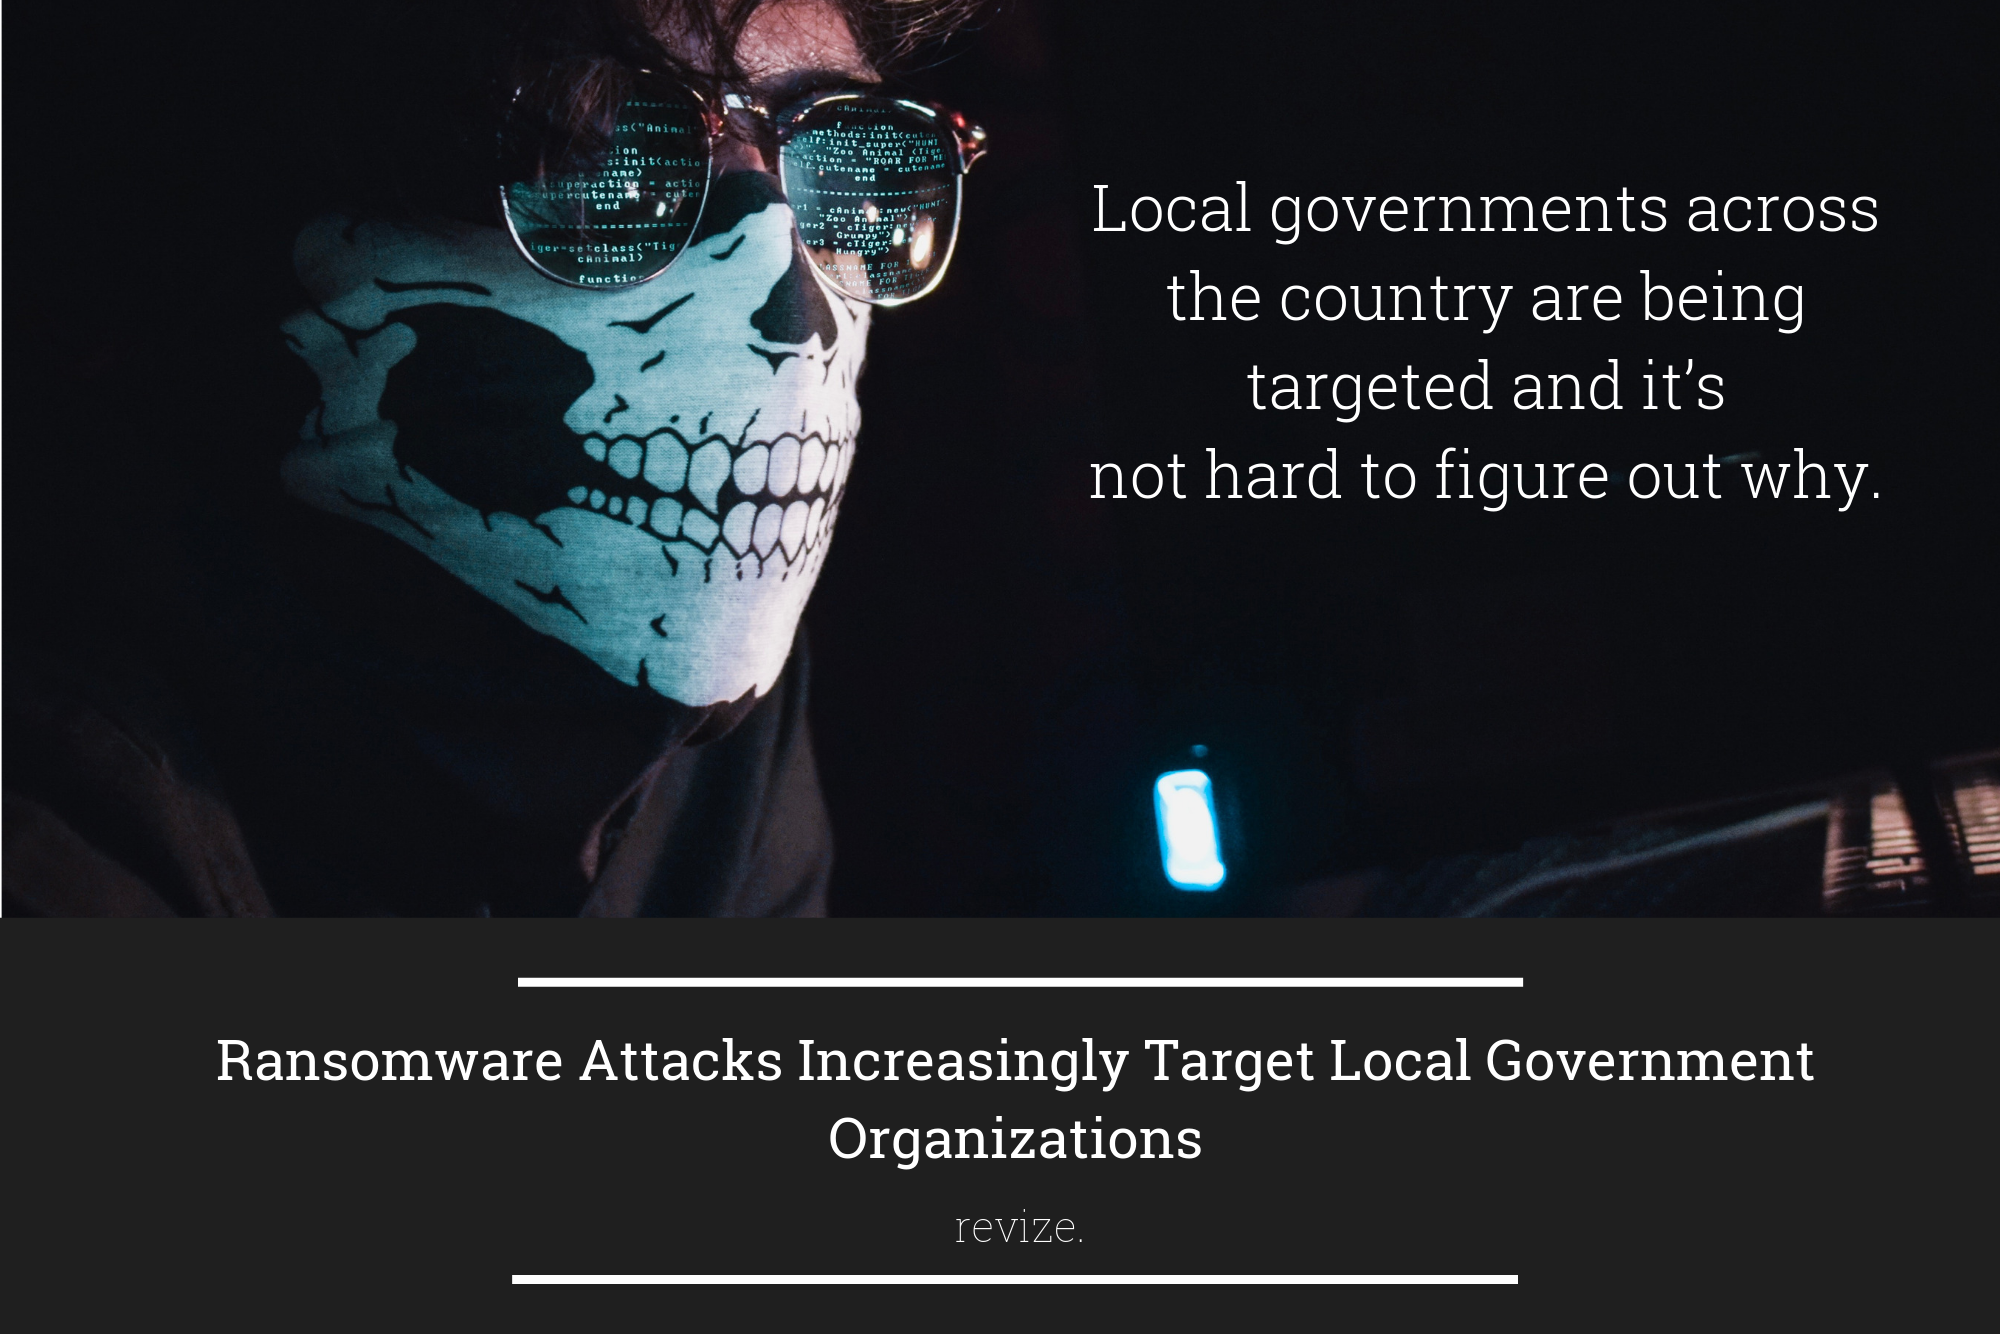 Ransomware Attacks Increasingly Target Local Government Organizations